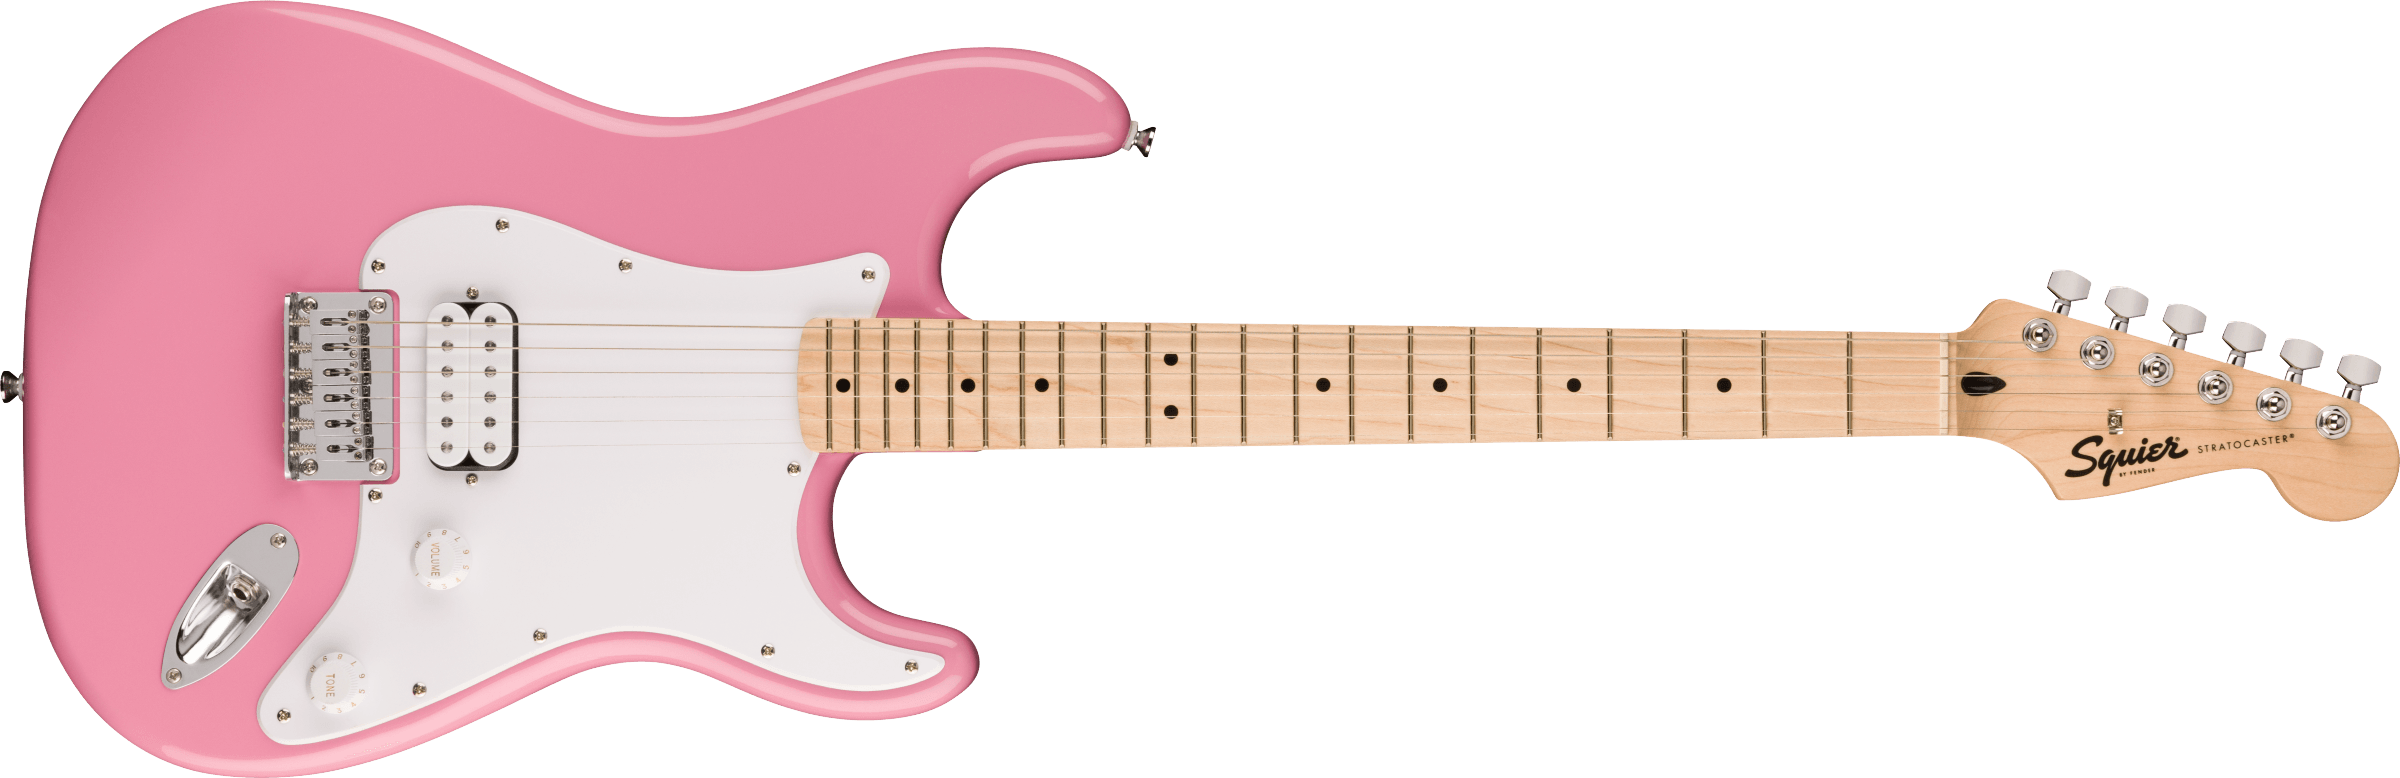 SQUIER - Sonic Stratocaster HT MN Flash Pink